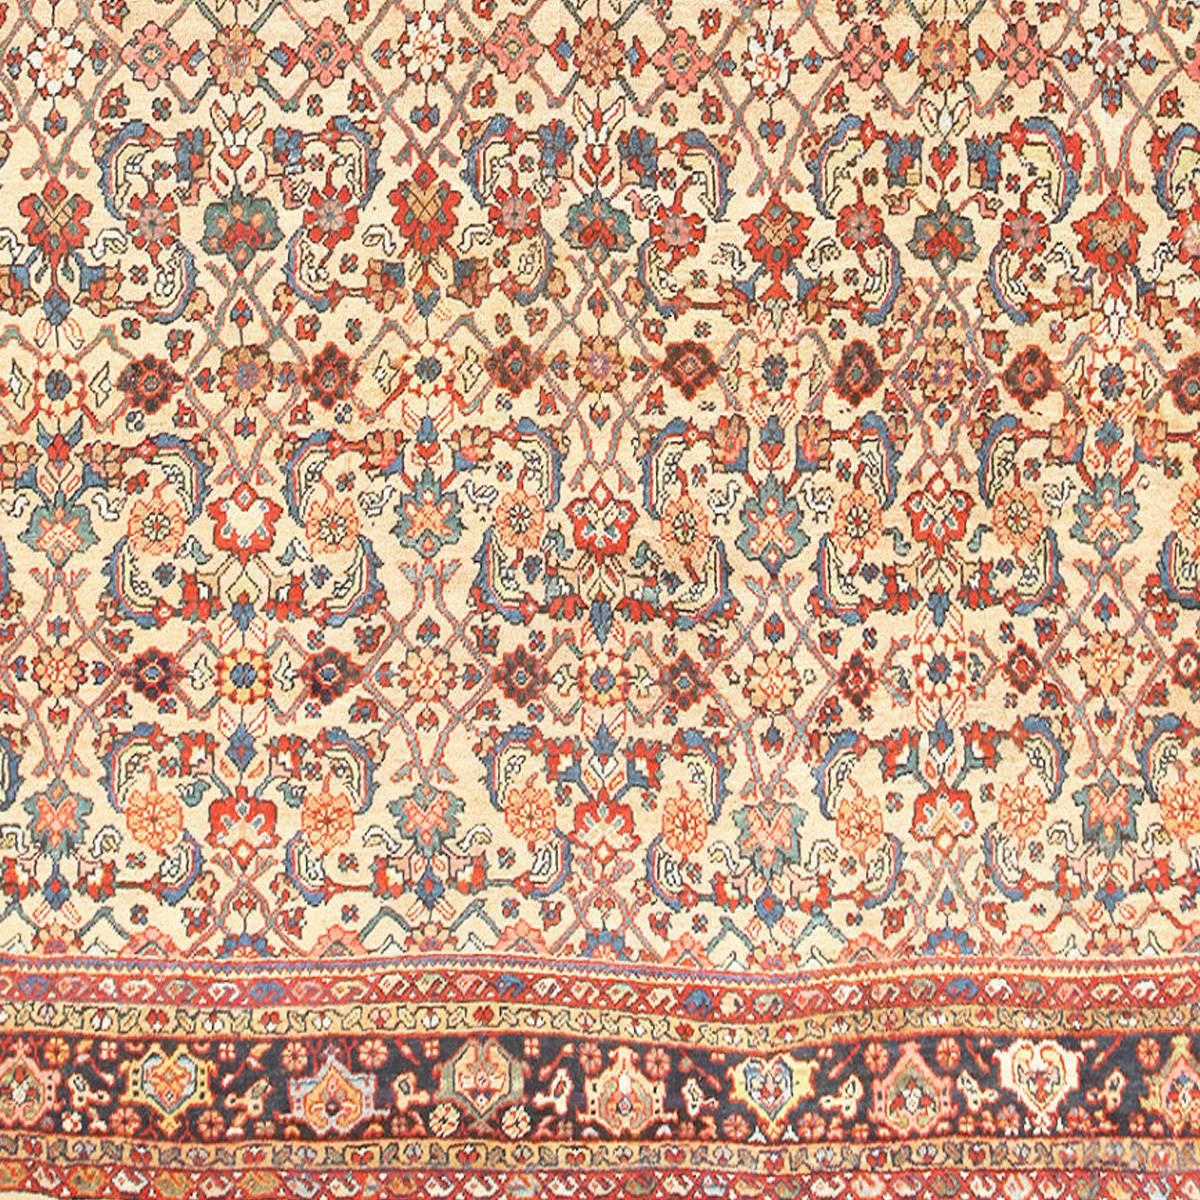 Beautiful Camel Colored Background Room Size Antique Persian Sultanabad Rug, Country of Origin / Rug Type: Persian Rug, Date: Circa 1910. Size: 10 ft 4 in x 12 ft 9 in (3.15 m x 3.89 m)

With an incredible collection of details assembled to